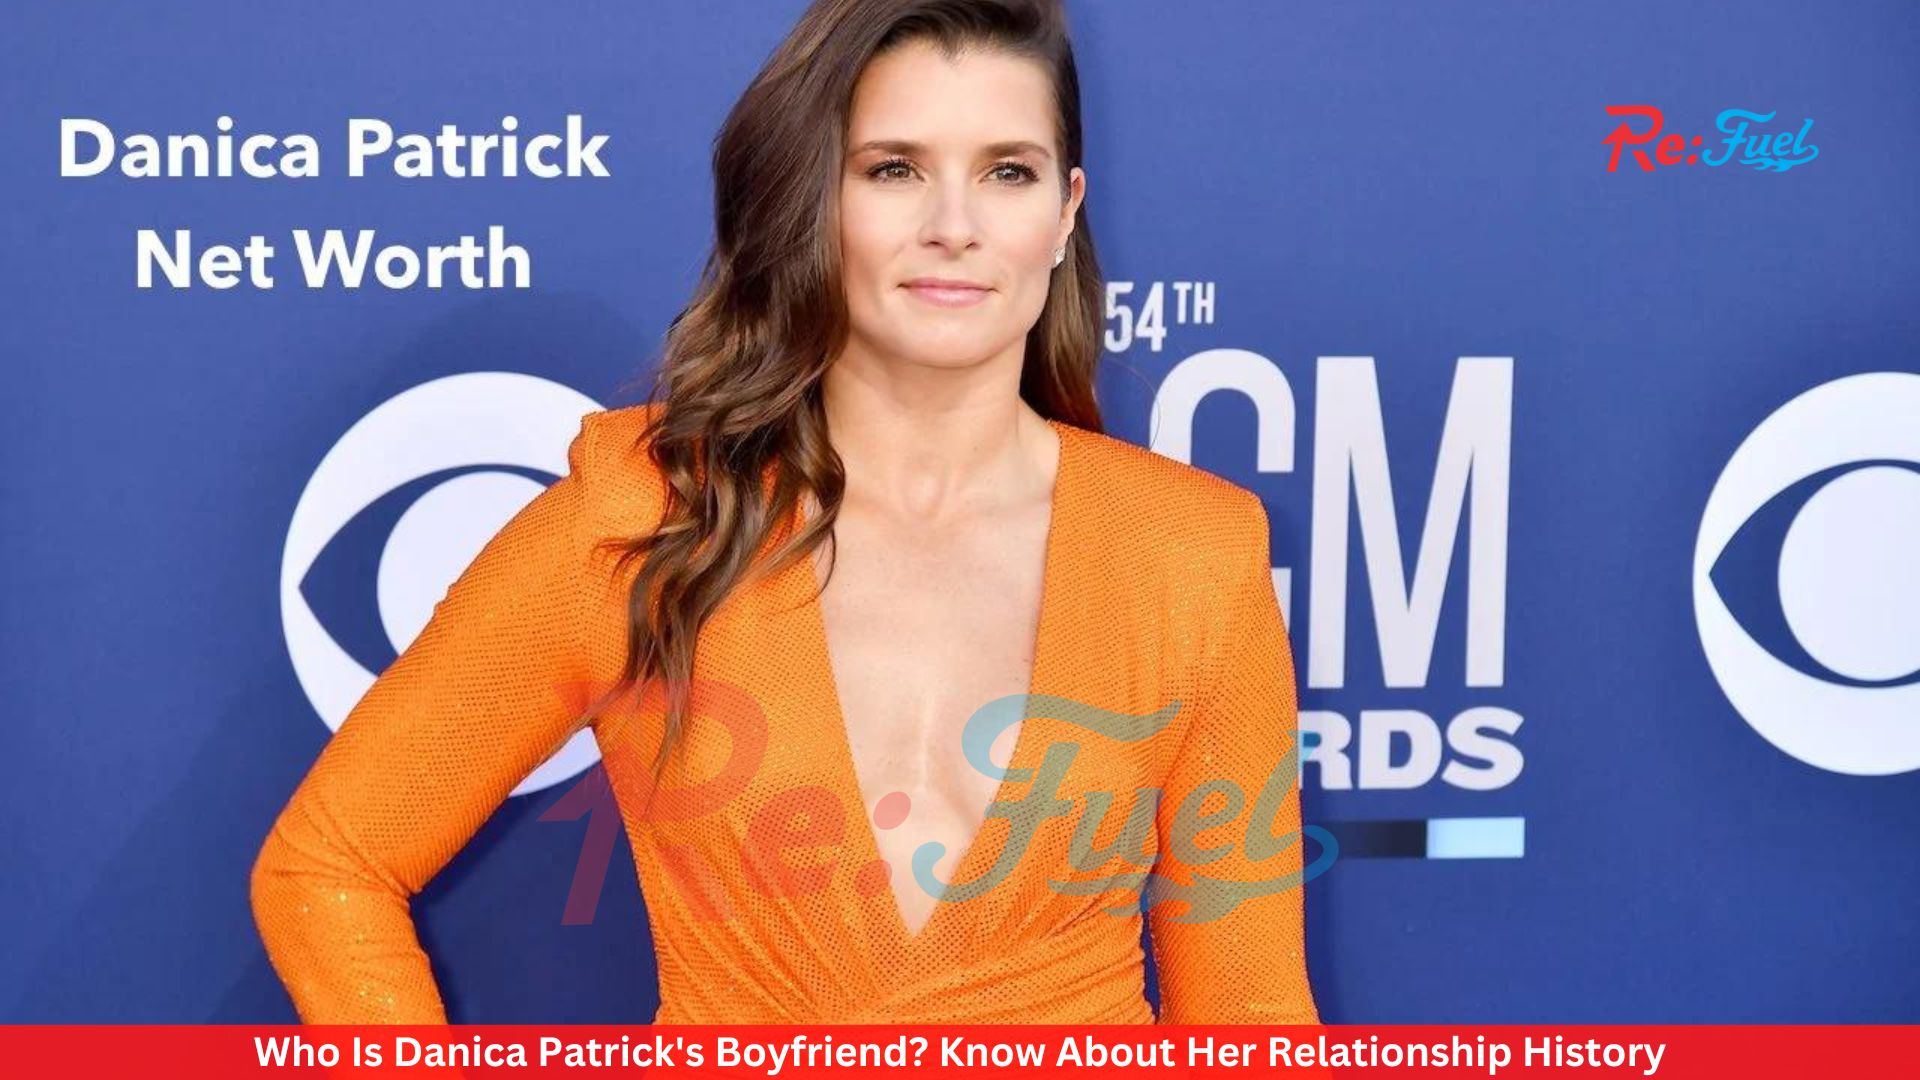 Who Is Danica Patrick's Boyfriend? Know About Her Relationship History